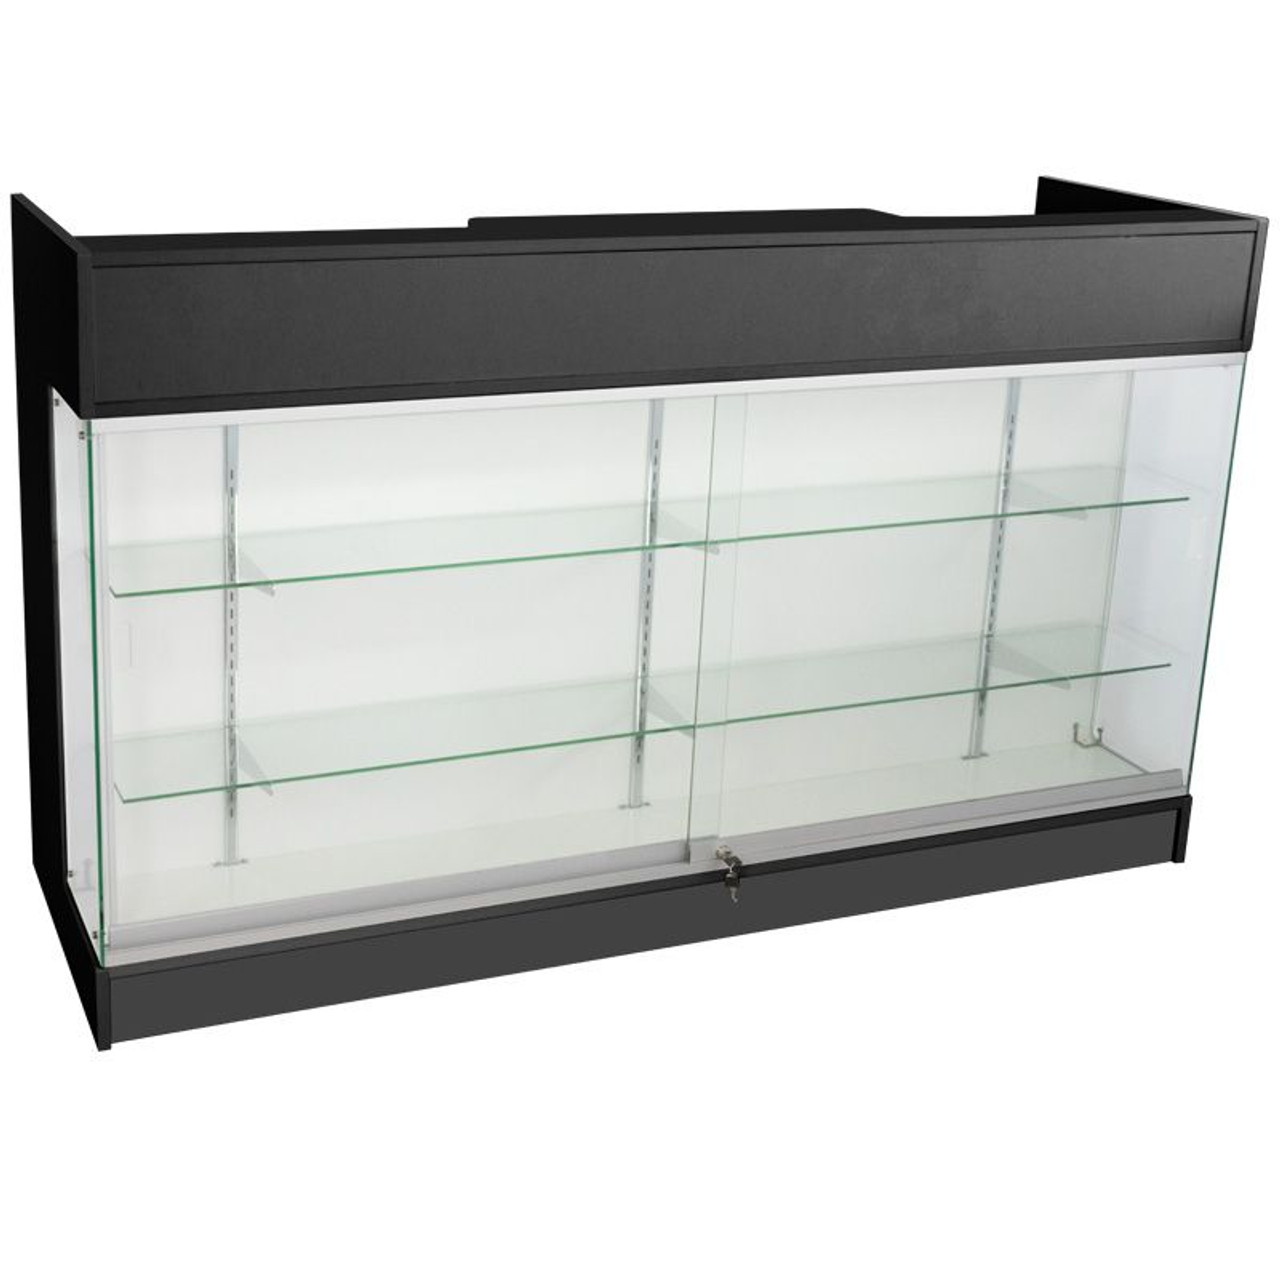 72" Black Ledgetop Counter With Showcase Front